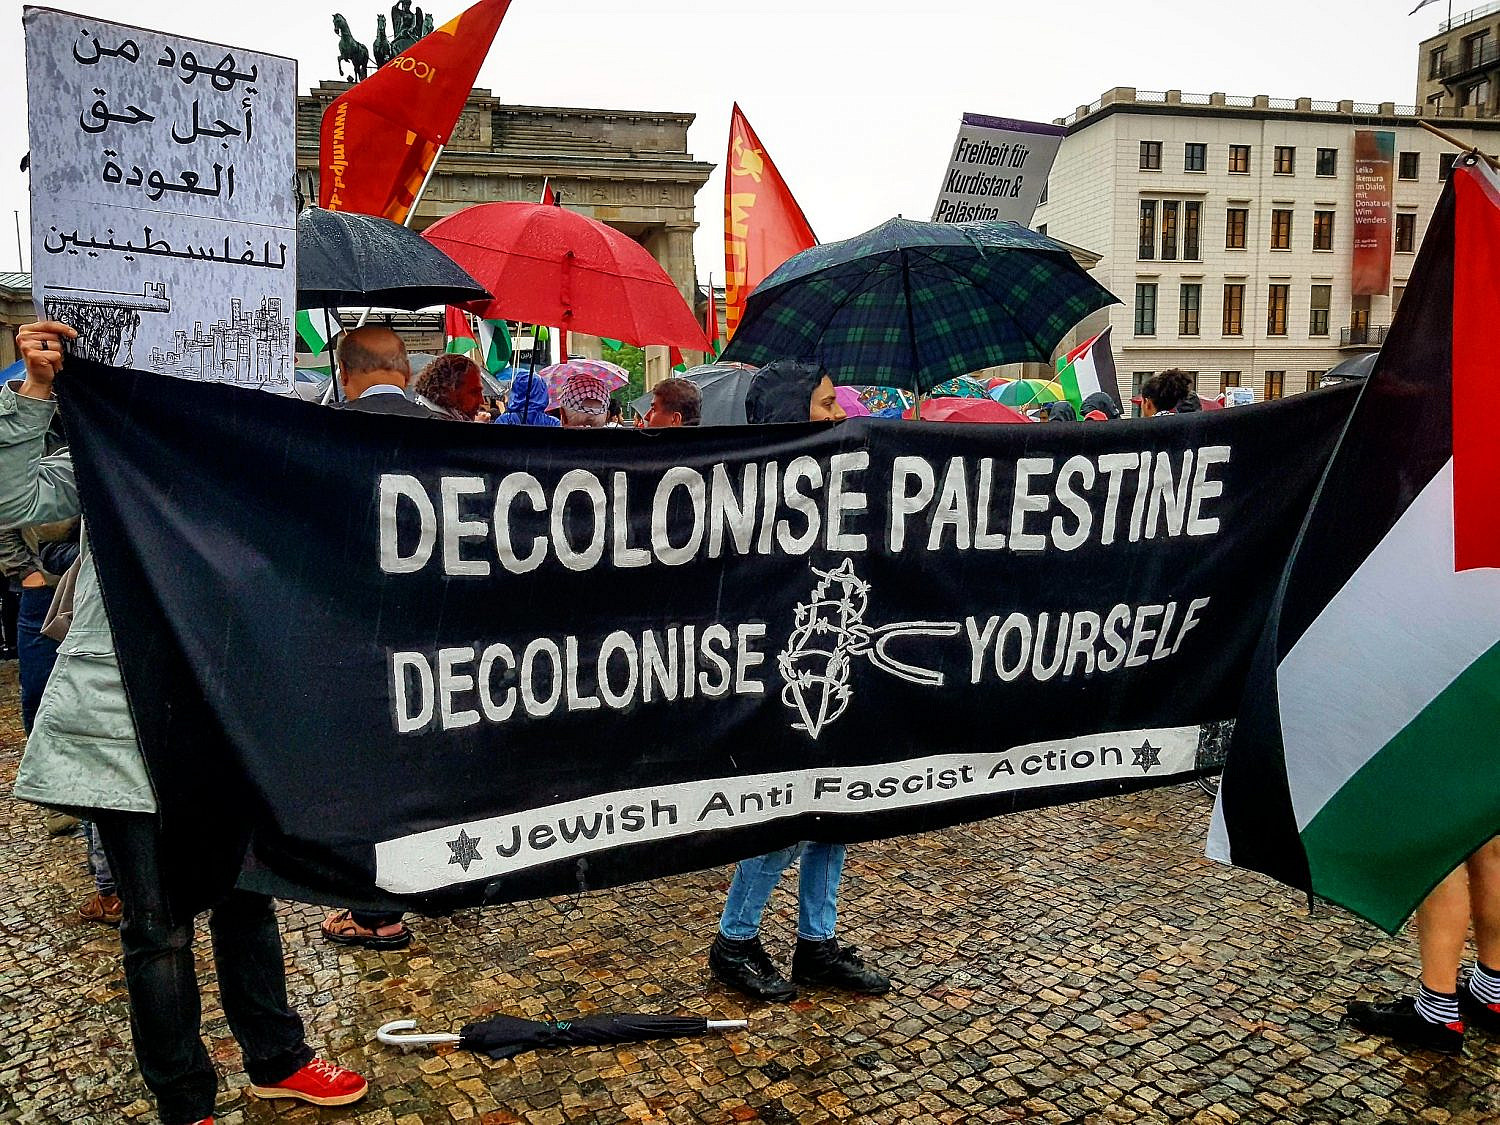 Palestine solidarity protest in Berlin, Germany, May 15, 2018. (Hossam el-Hamalawy/Flickr/CC BY 2.0)